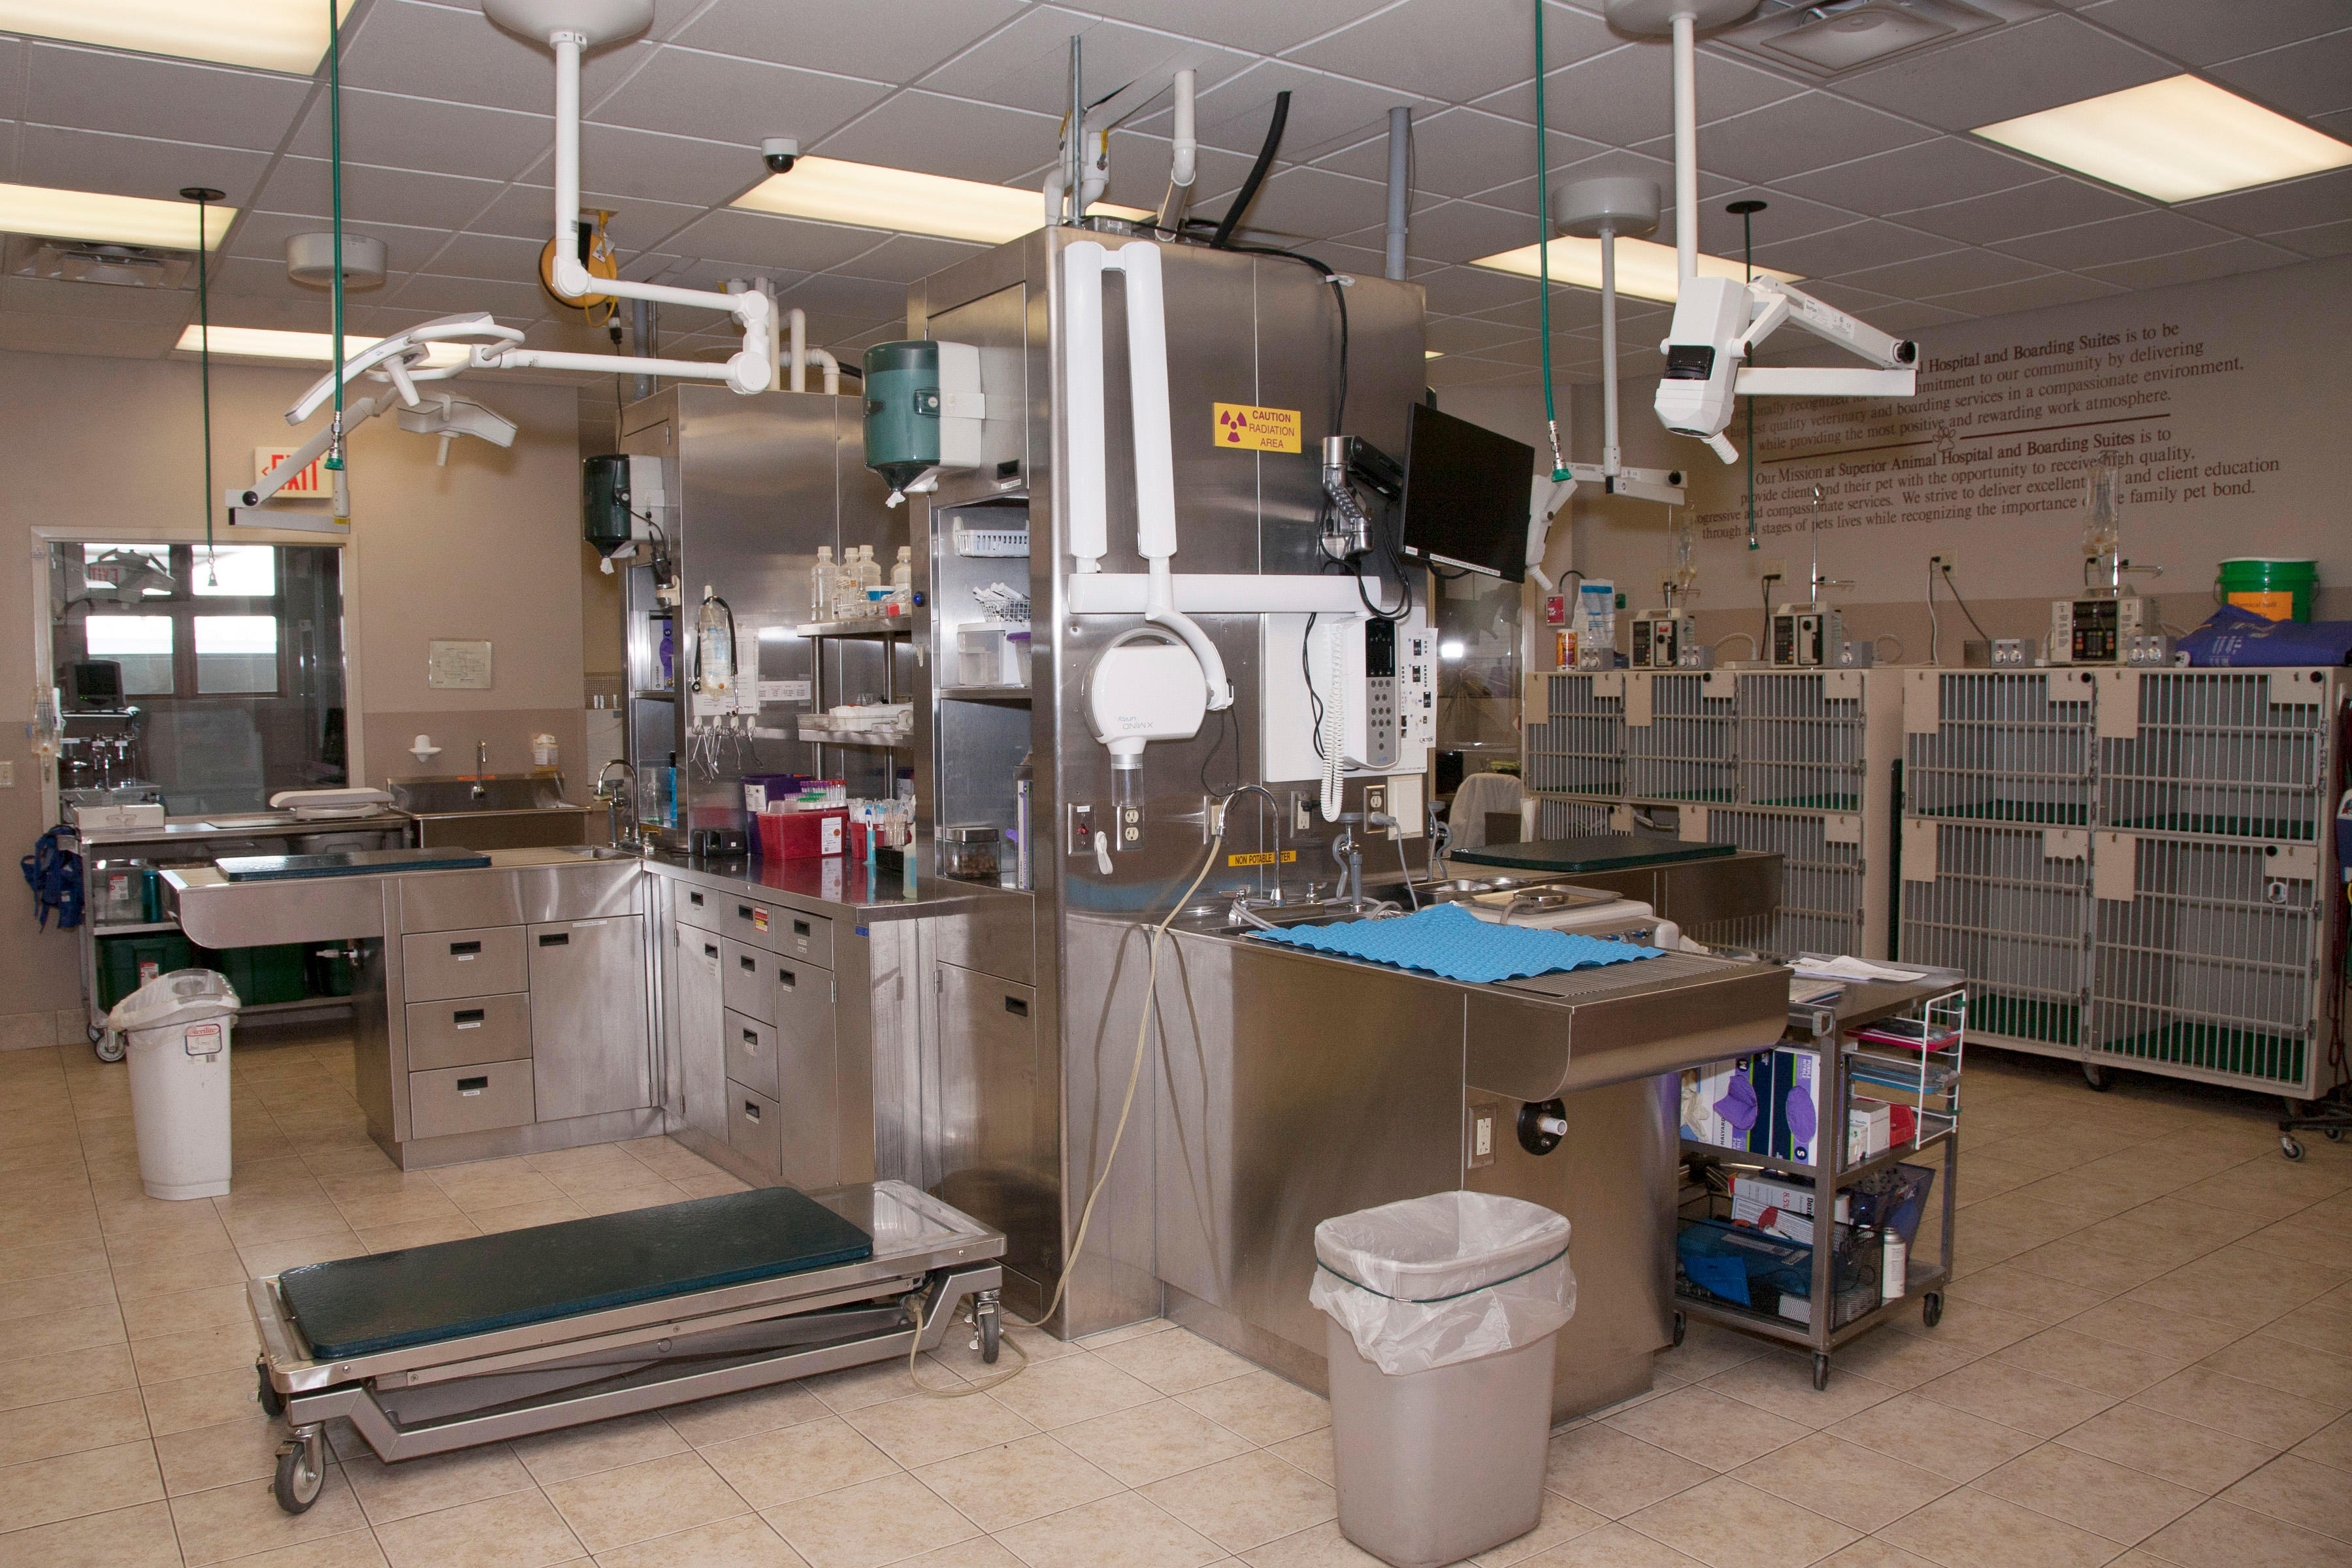 Take a peek inside the treatment area at Superior Animal Hospital. Here, our medical team carries out a variety of procedures, such as administering vaccines, dental cleanings, and pre-surgical preparation.